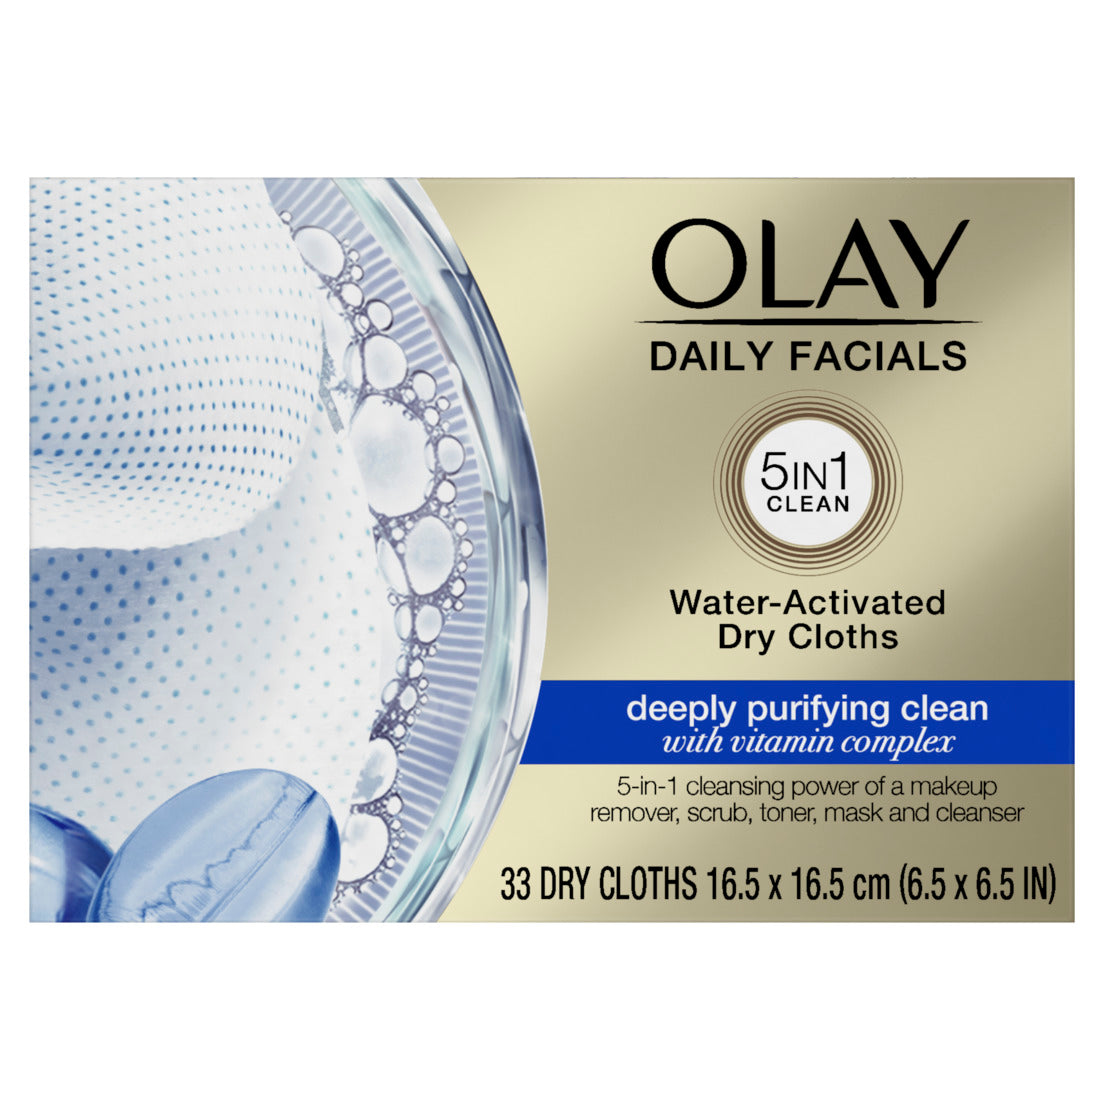 Olay Daily Facials Deeply Purifying Cleansing Cloths - 33ct/12pk